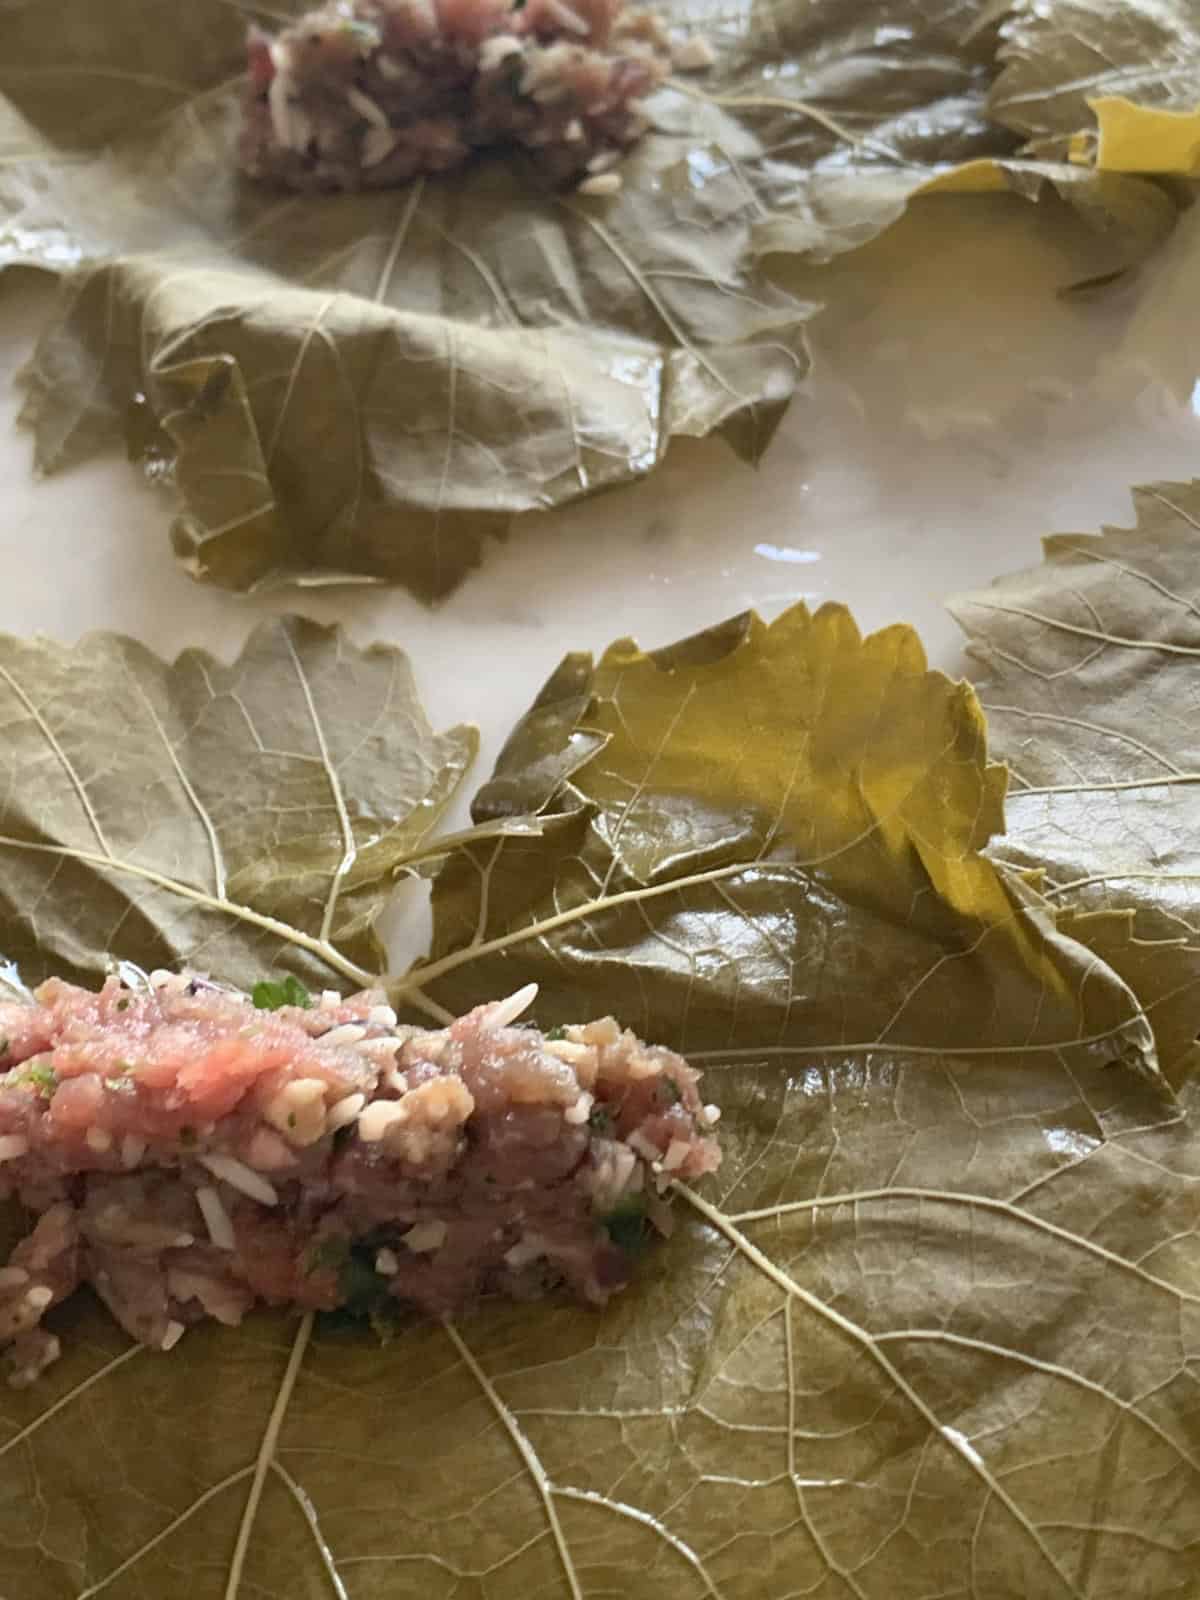 Meat mixture on a grape leaves.